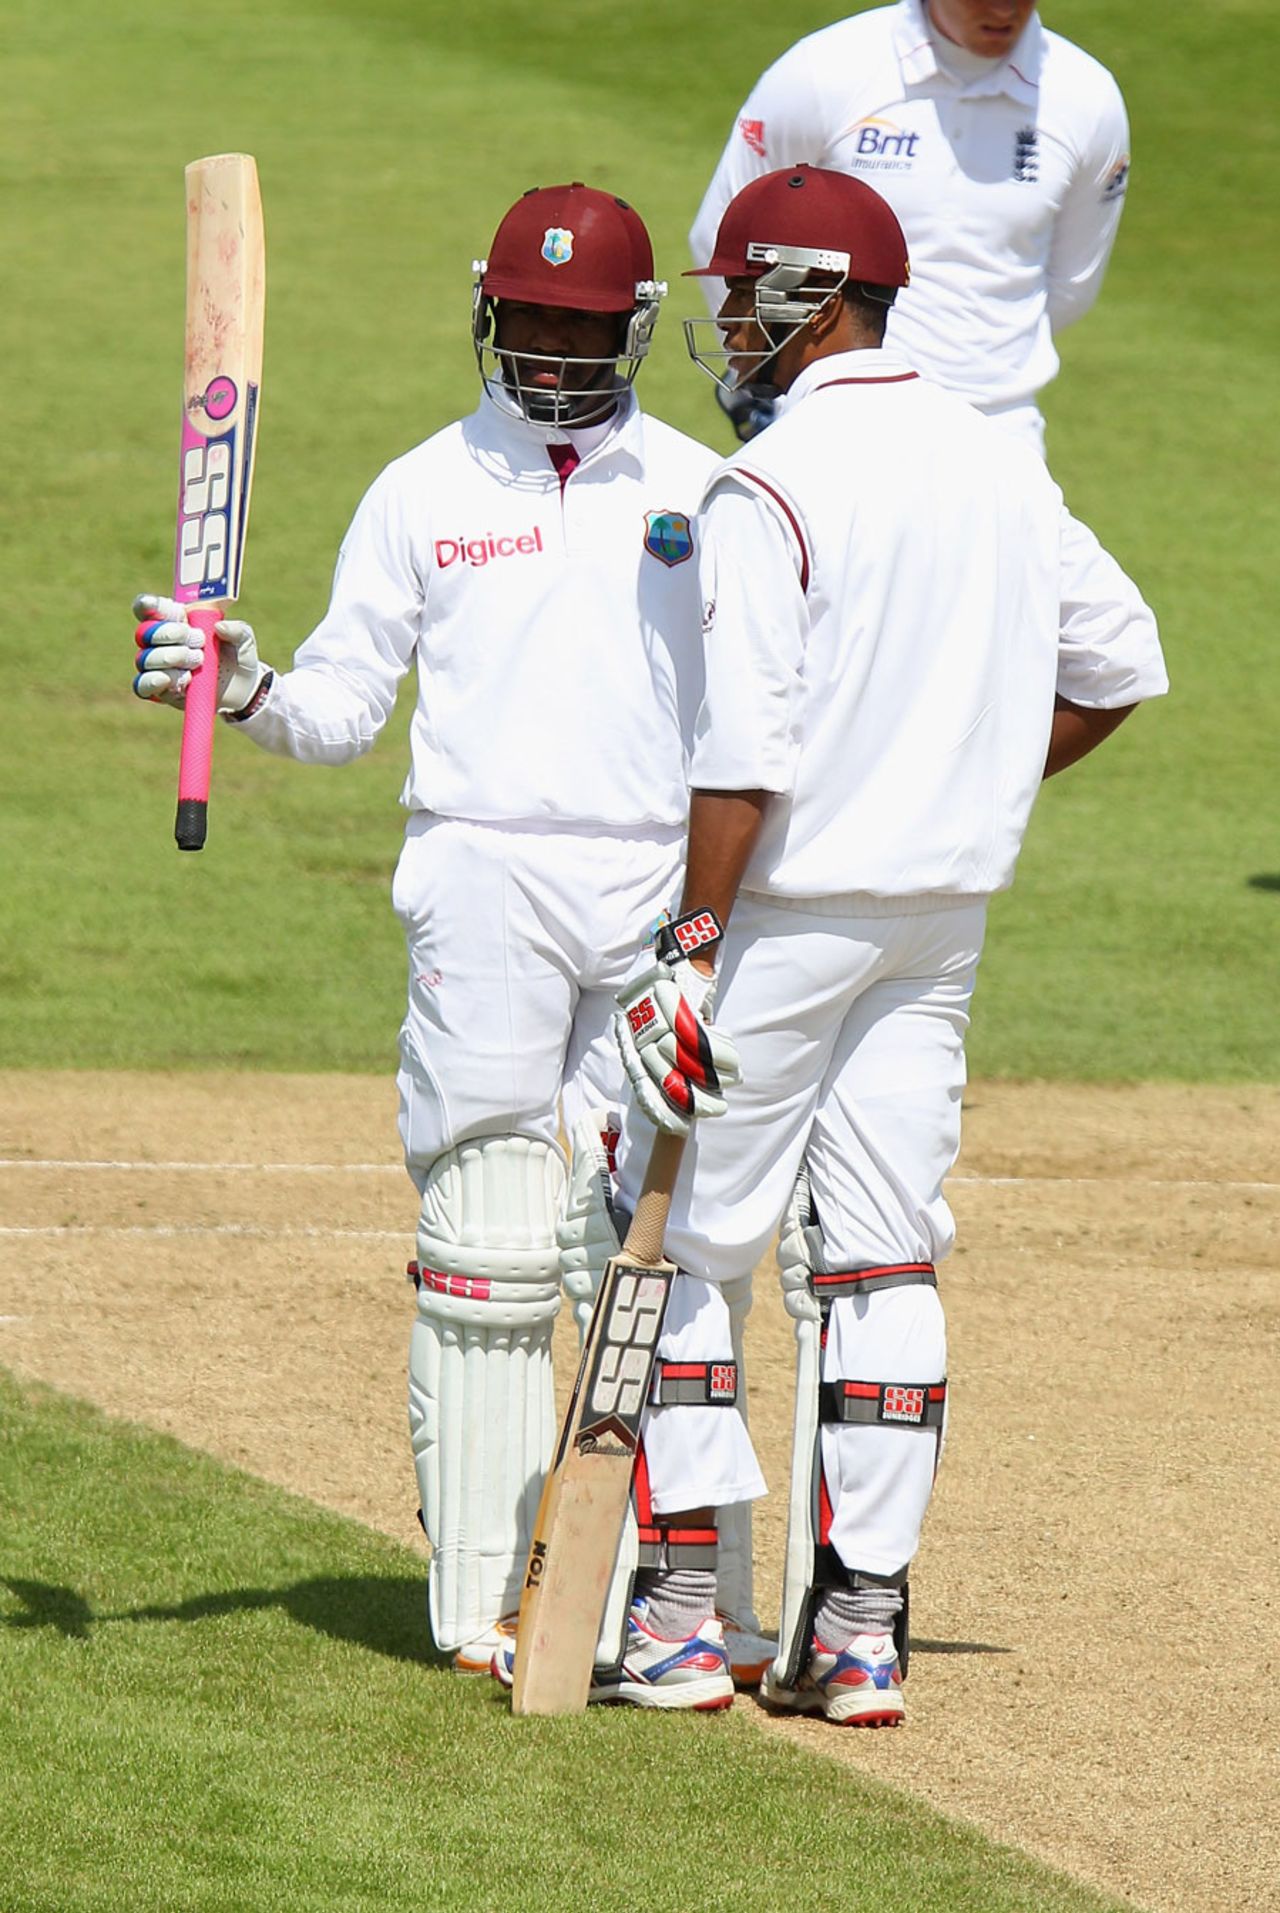 Darren Bravo acknowledges his half-century during a hundred partnership with Kieran Powell, England Lions v West Indians, Tour Match, 3rd day, Northampton, May 12, 2012